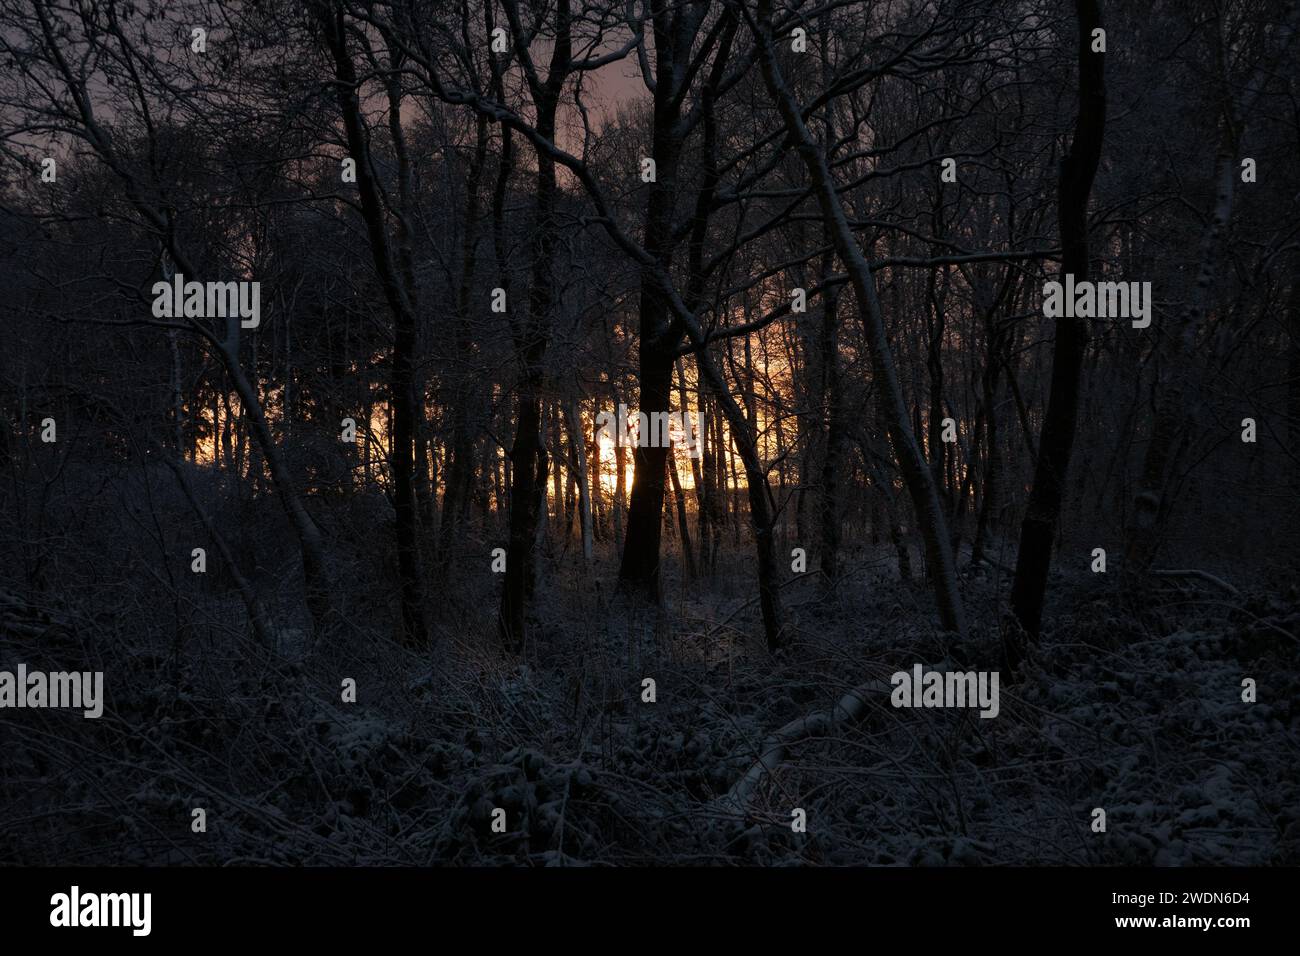 Swampy snow-covered forest at sunrise: silhouettes of trees against an orange sky Stock Photo